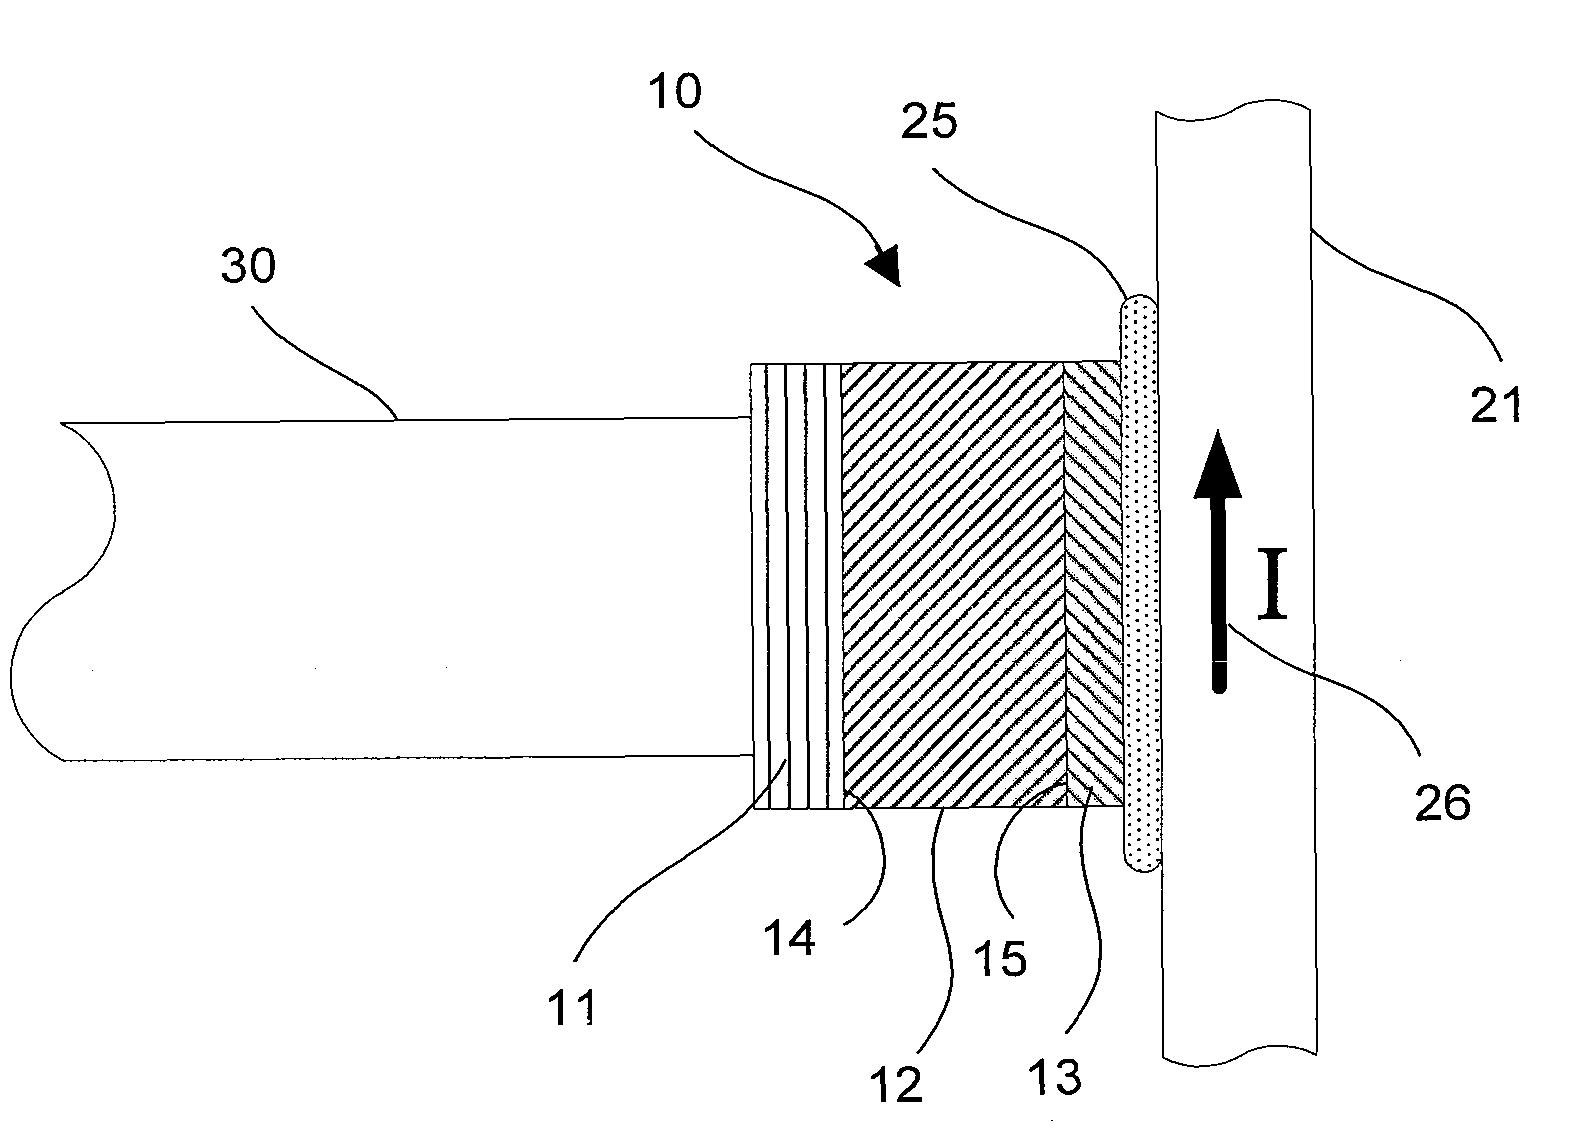 Optical sensor for monitoring electrical current or power